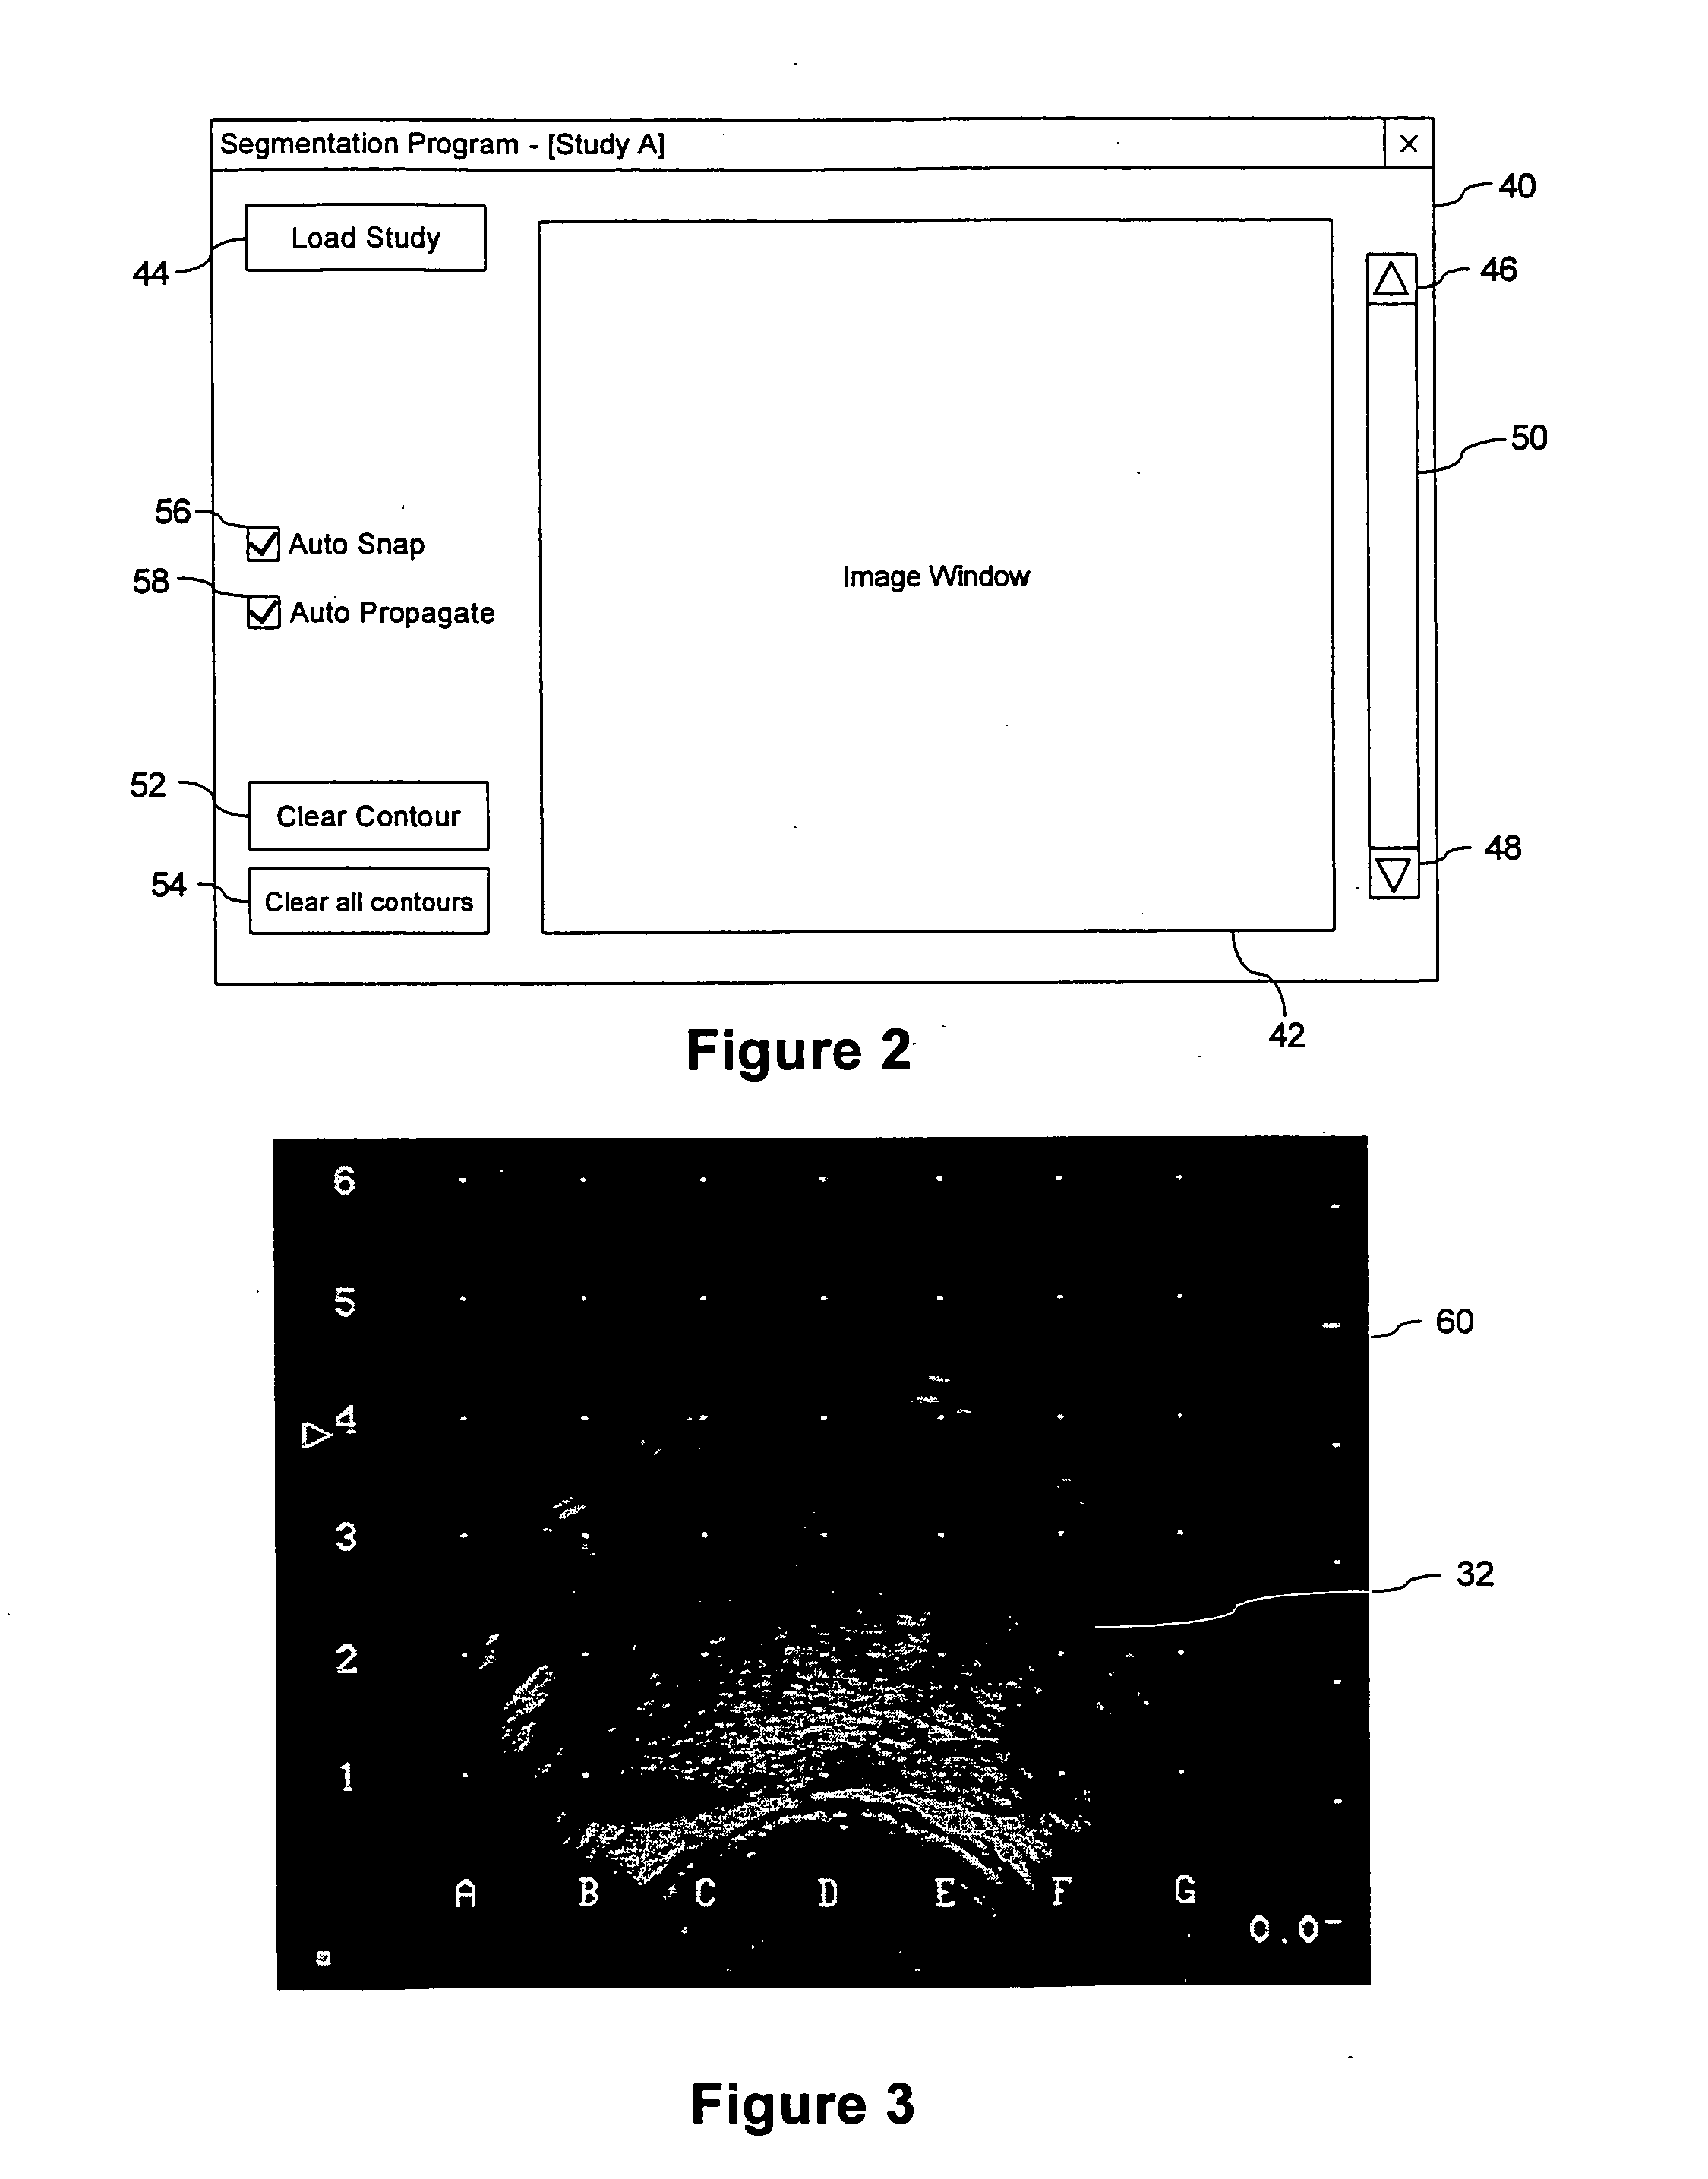 System and Method for Segmenting a Region in a Medical Image